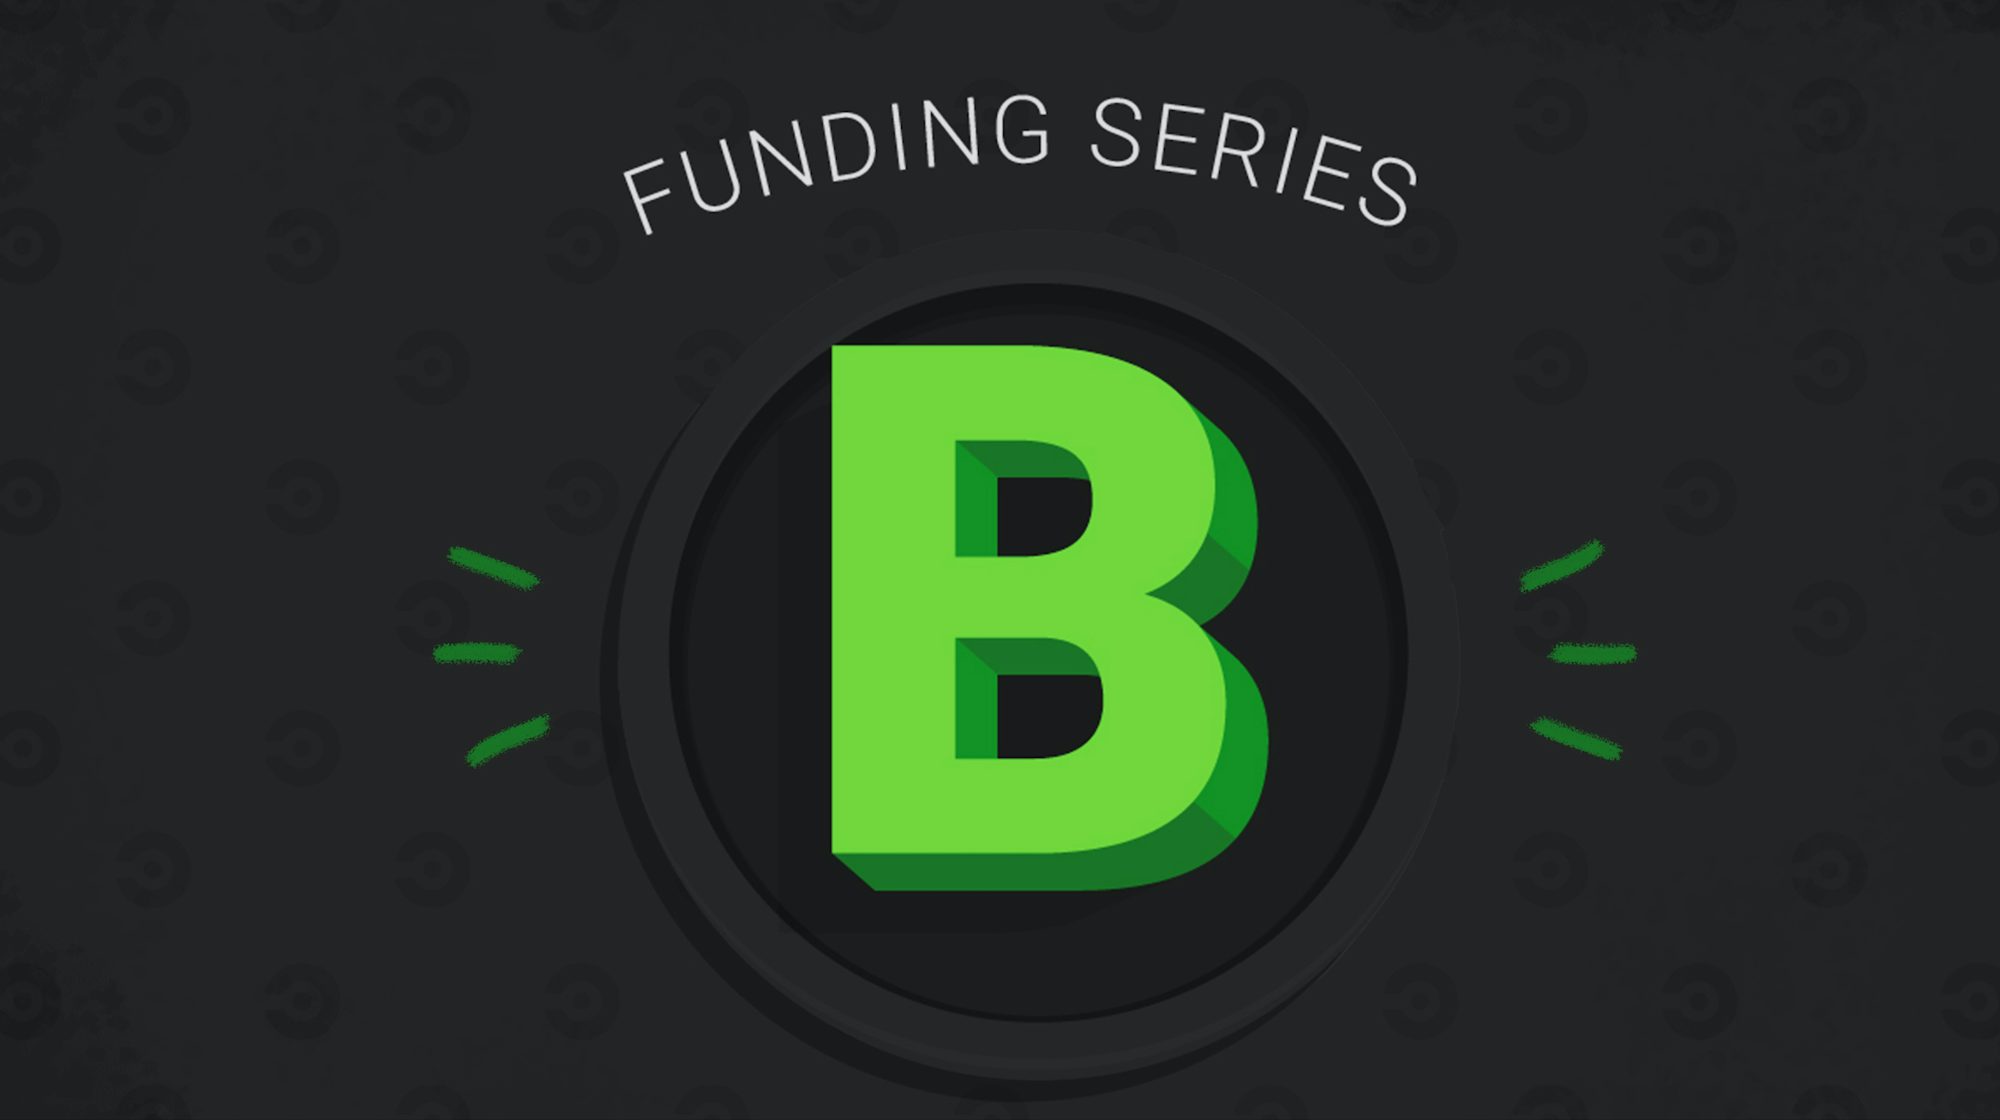 $18M Series B led by Scale Venture Partners with existing investors DFJ, Baseline Ventures and Harrison Metal